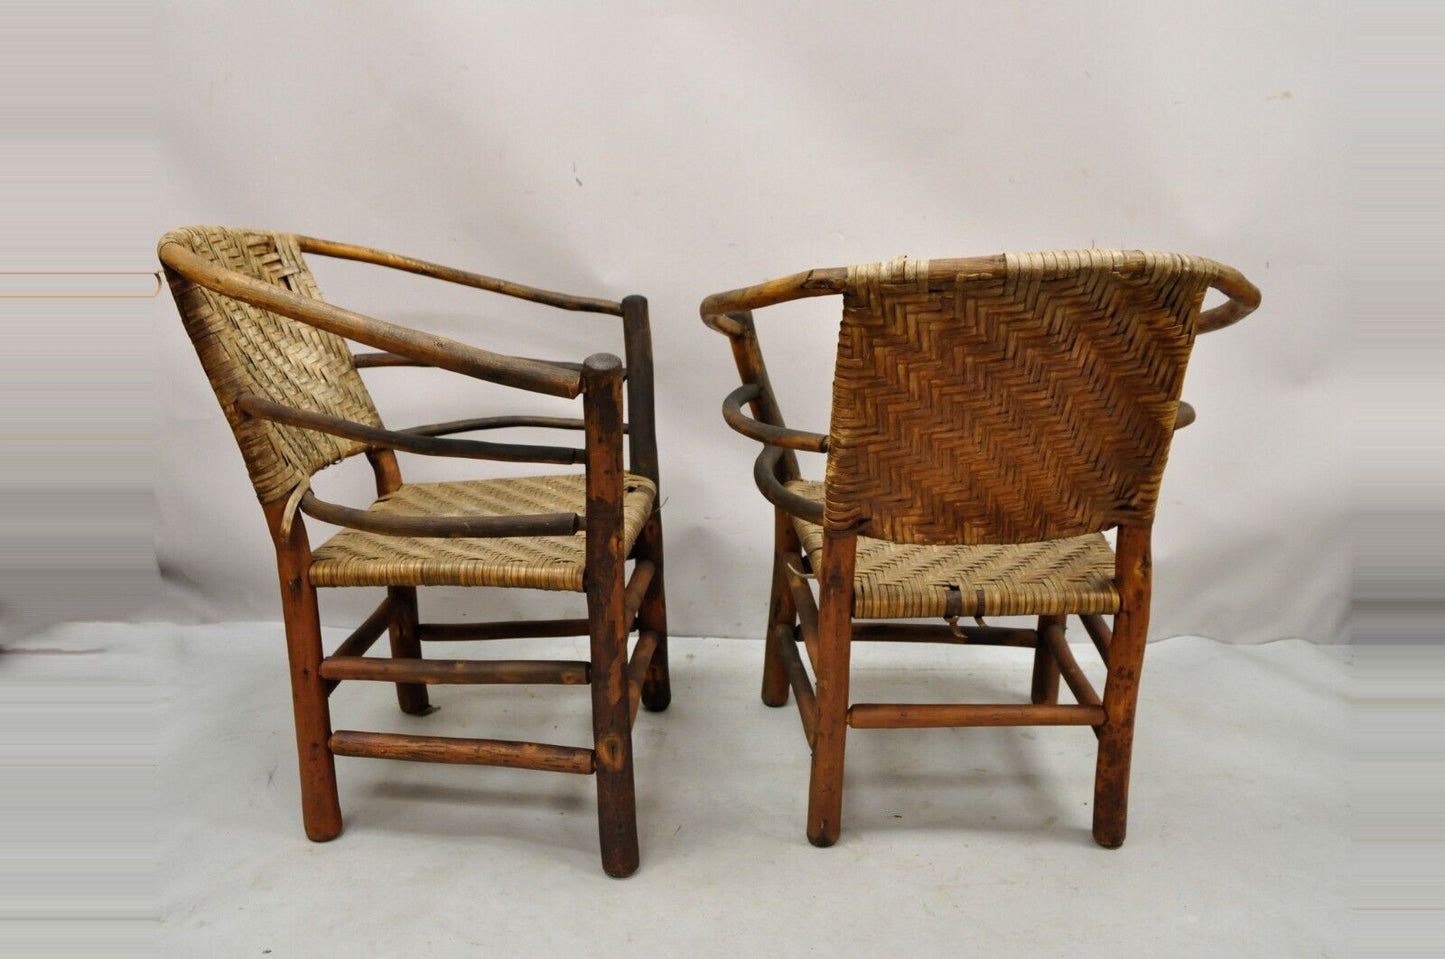 Adirondack Old Hickory Style Tree Branch Wood Frame Rattan Lounge Chairs a Pair